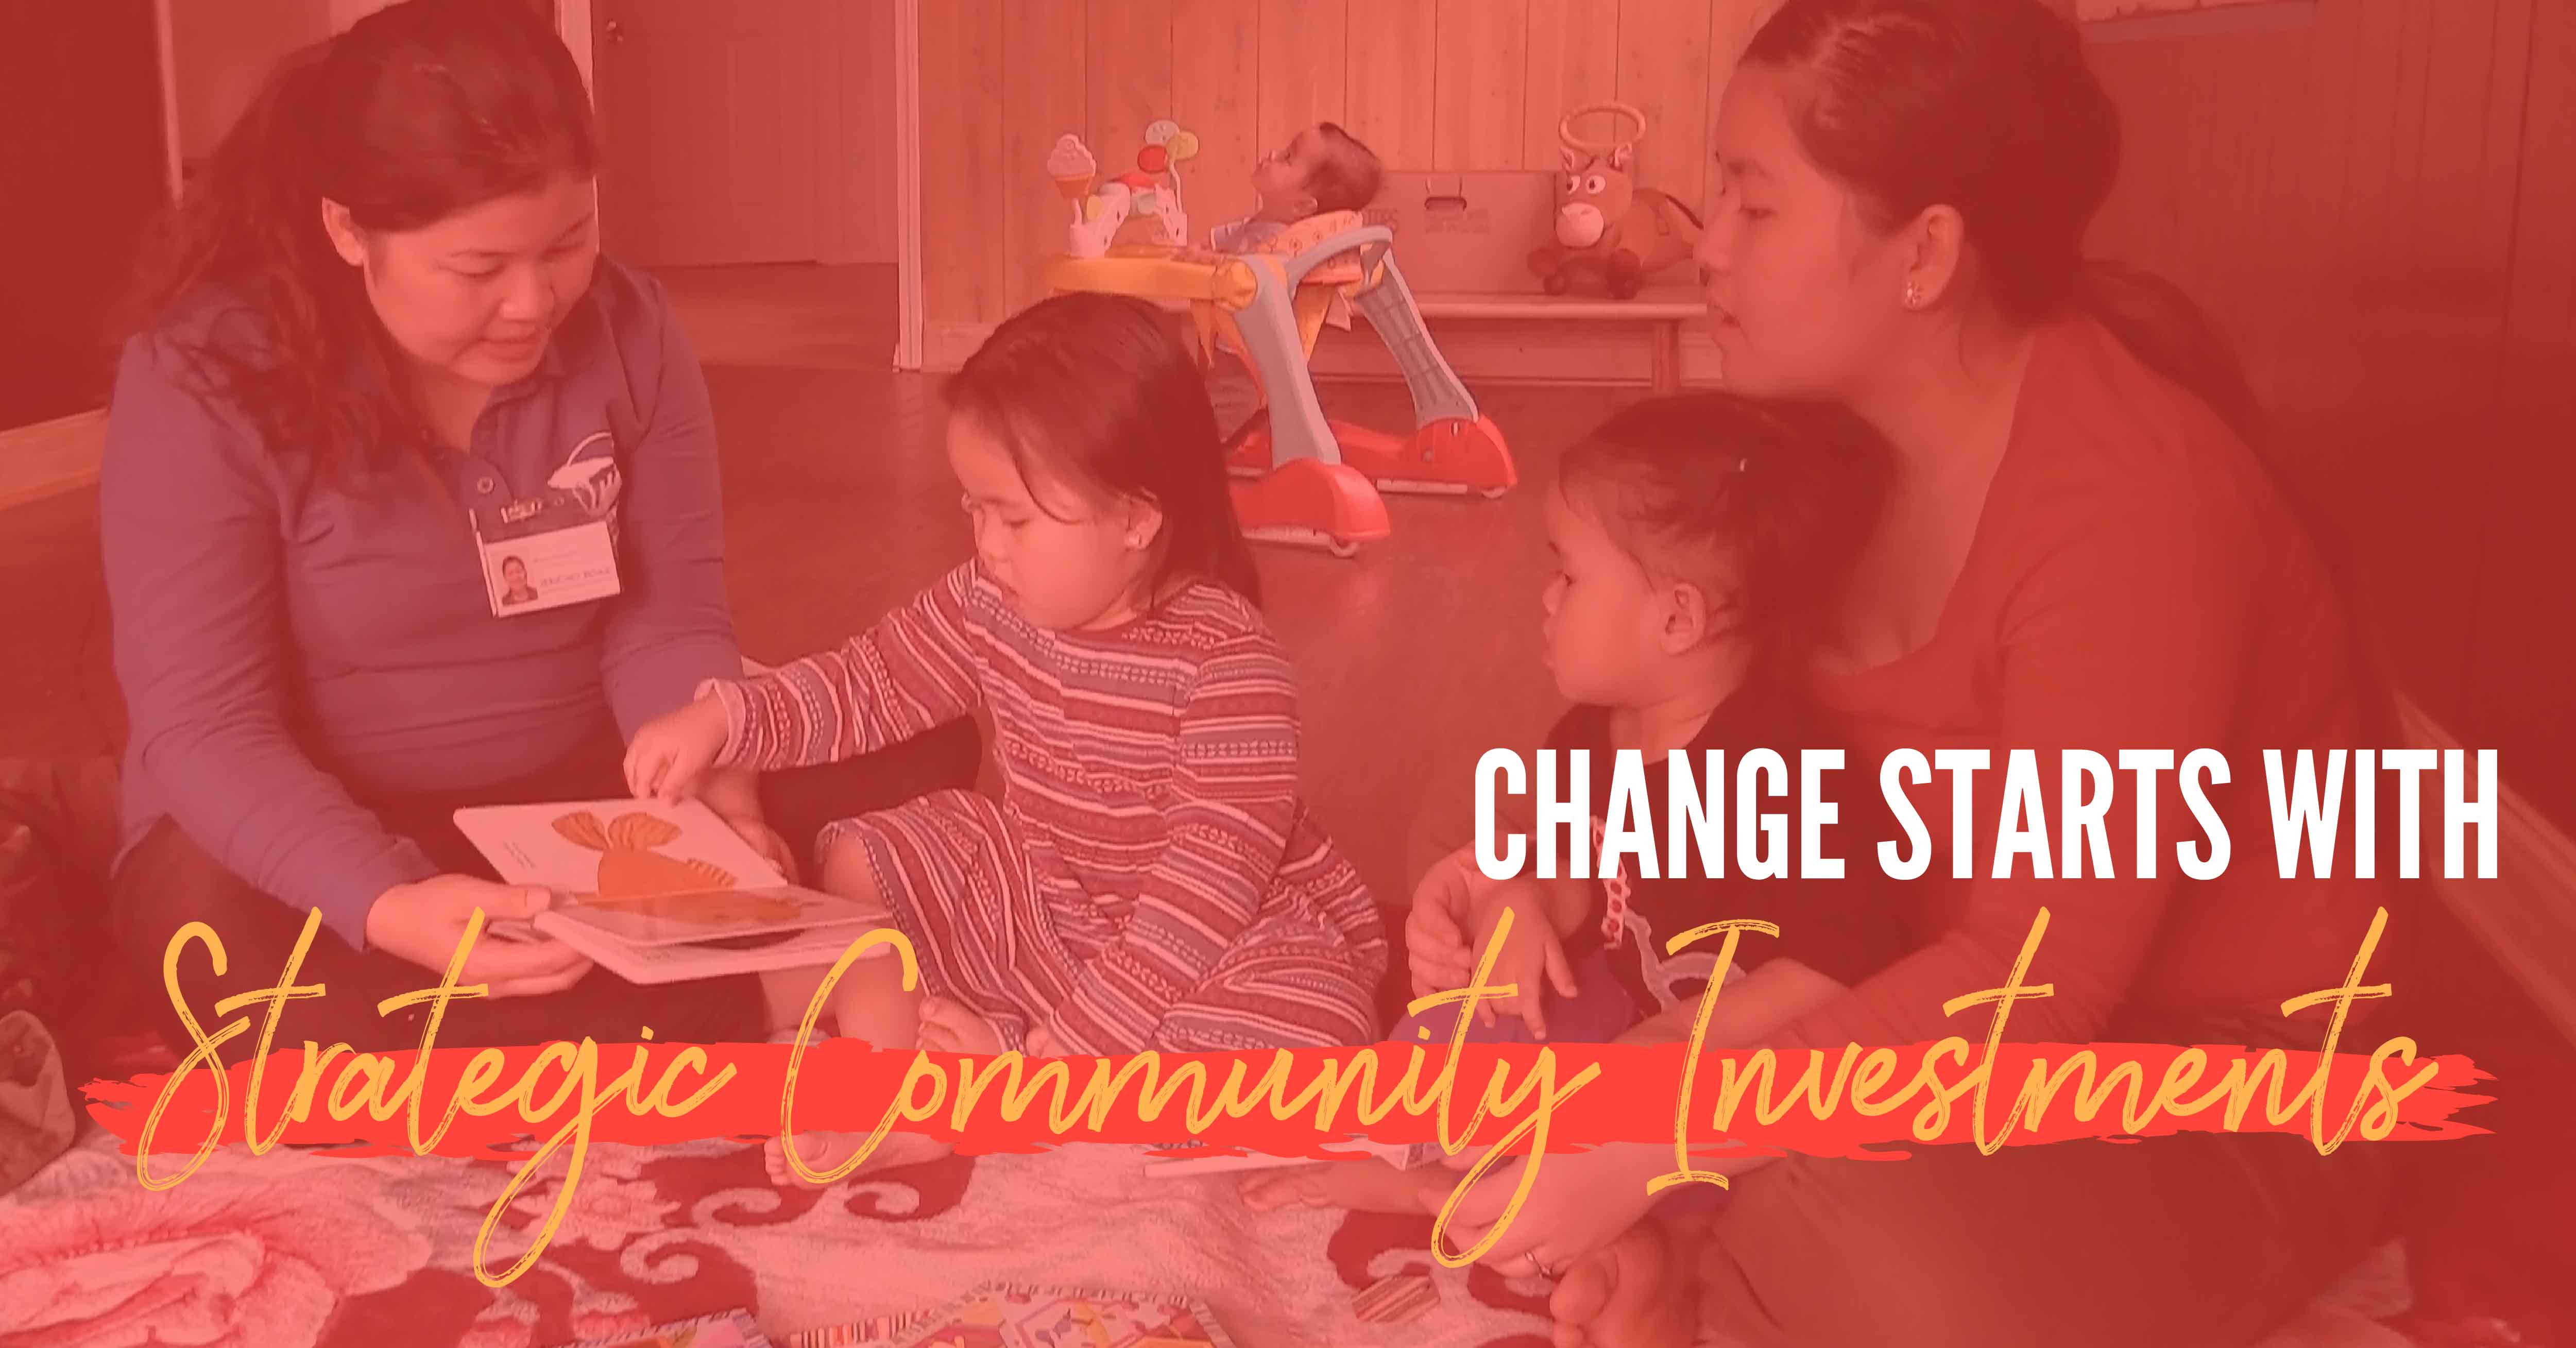 A woman sharing a book with a toddler with red overlay and the words "change starts with strategic community investments"